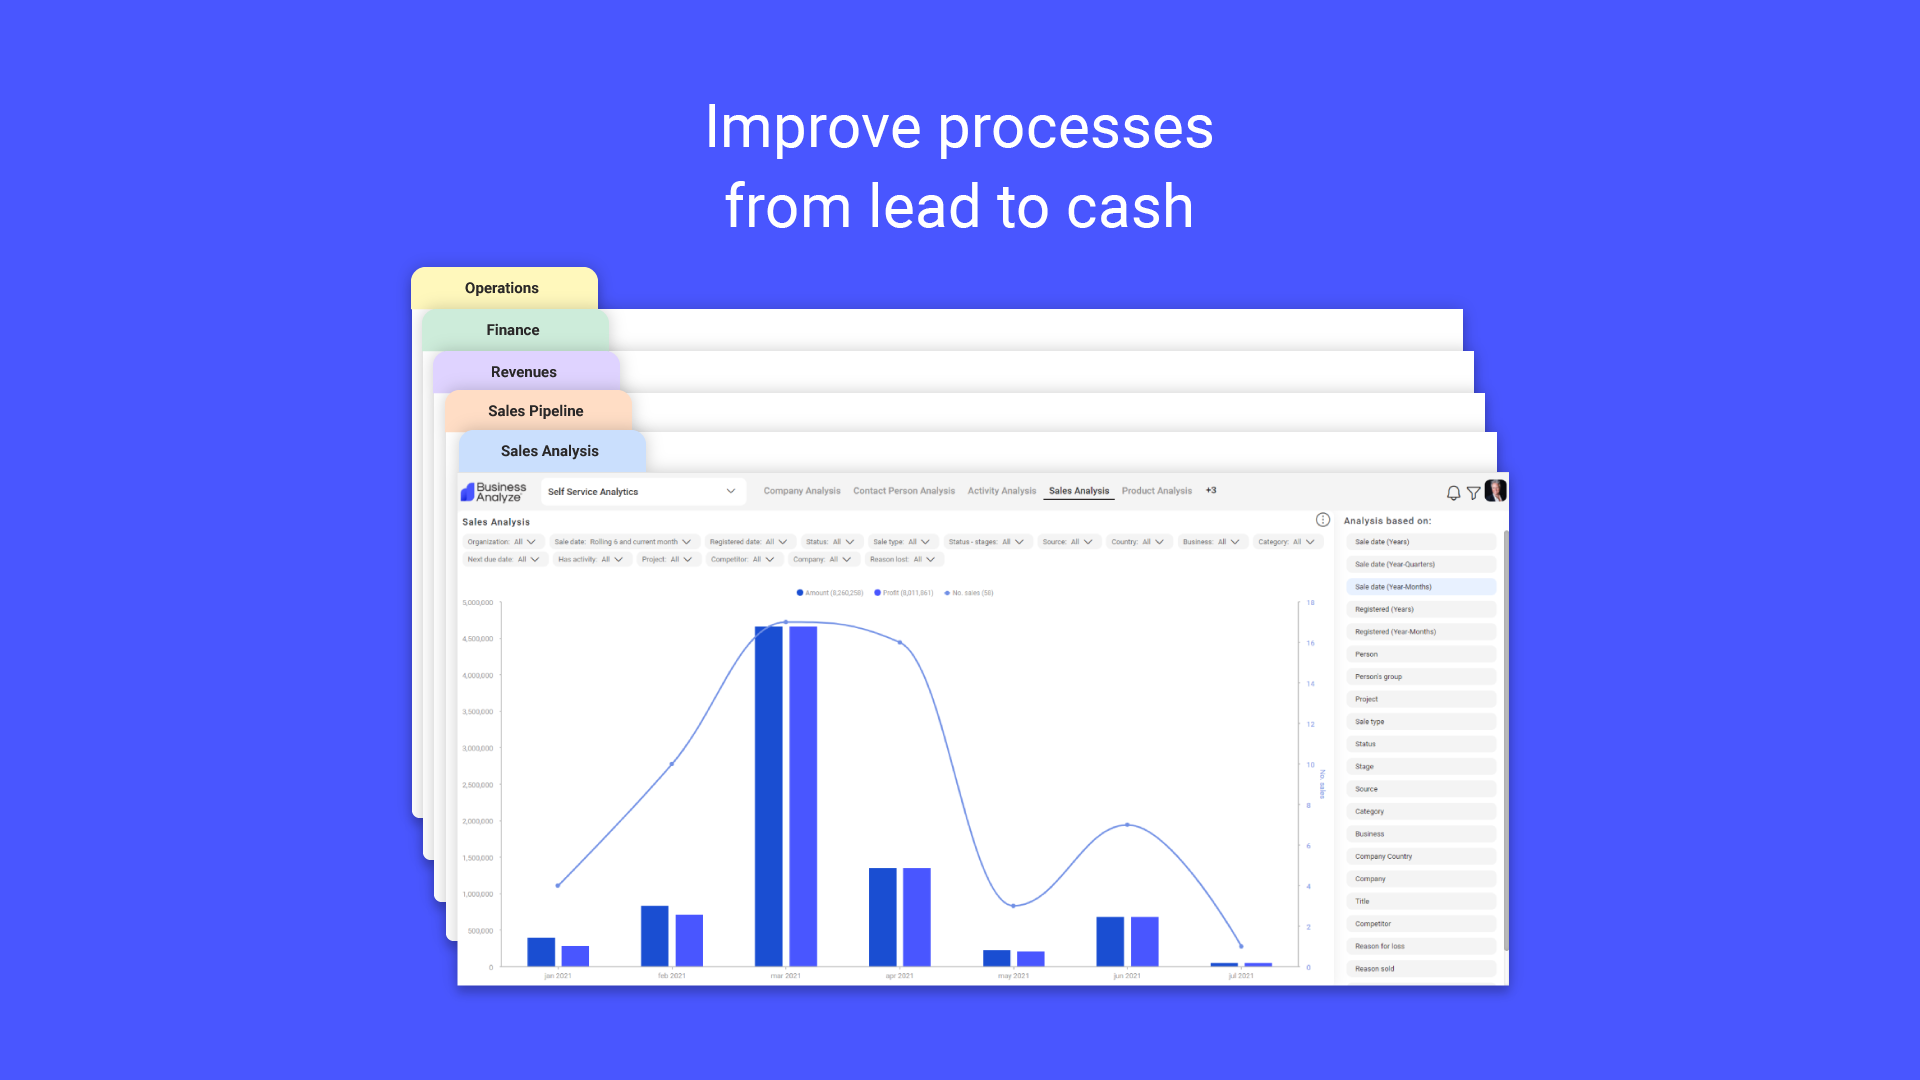 4. Improve processes from lead to cash.